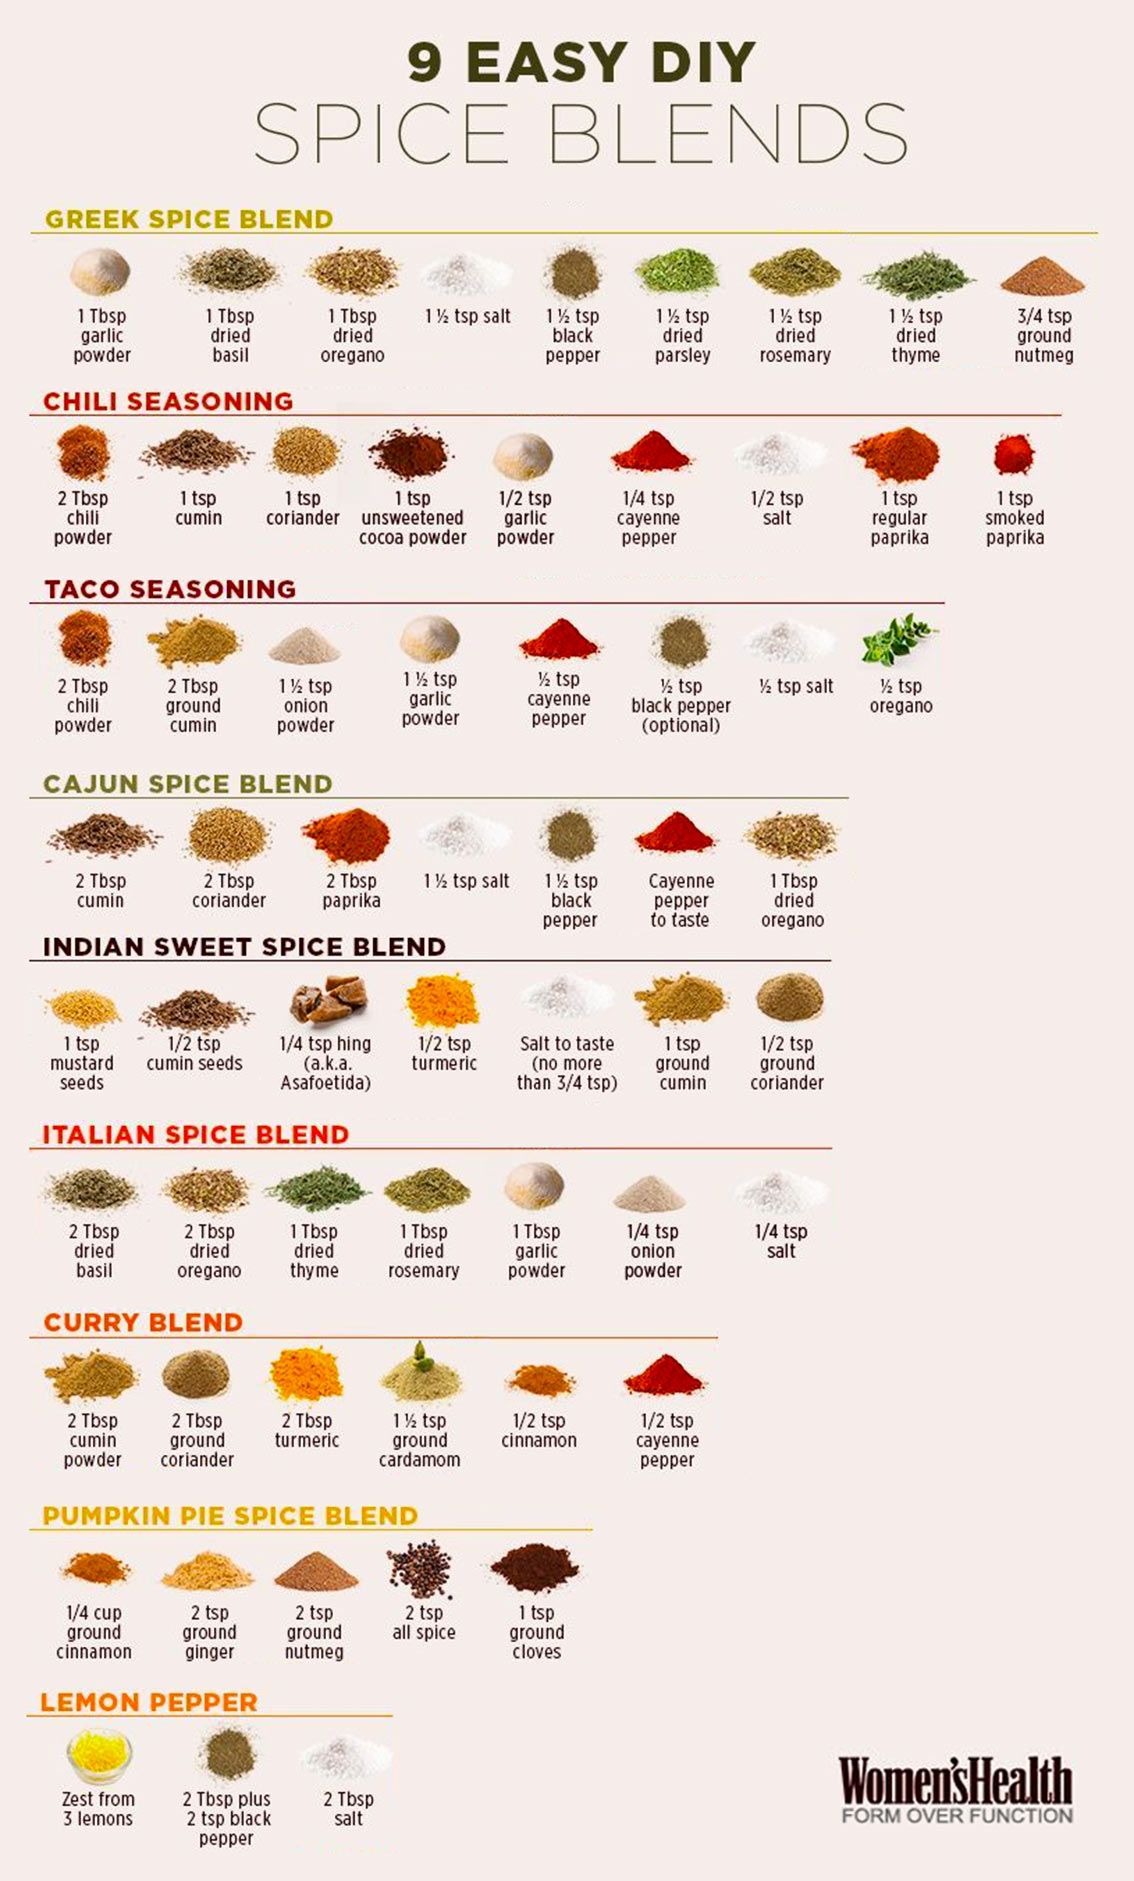 9 Easy Spice Blends